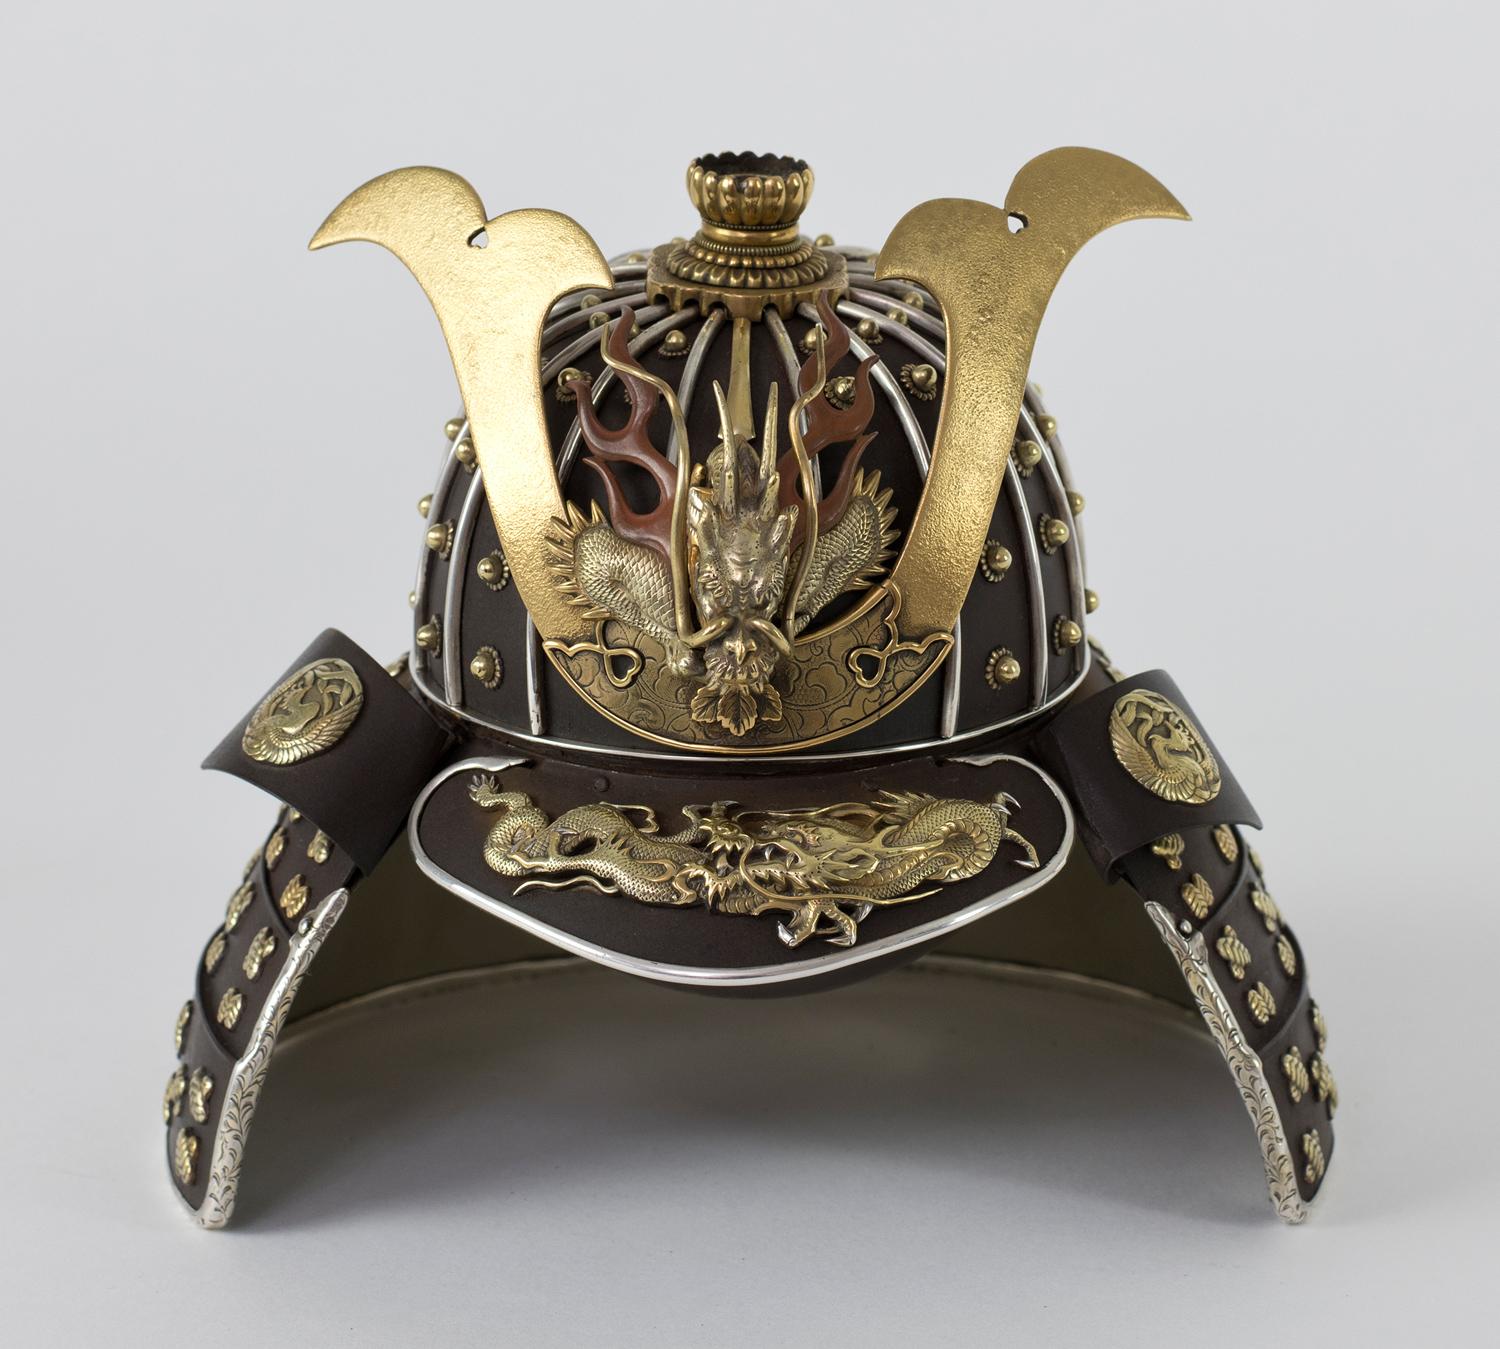 As part of our Japanese works of art collection we are delighted to offer this most unusual Meiji Period 1868-1912, iron and mixed metal koro in the form of a Samurai helmet (Kabuto), the unknown artist has used his metalworking skills to create a